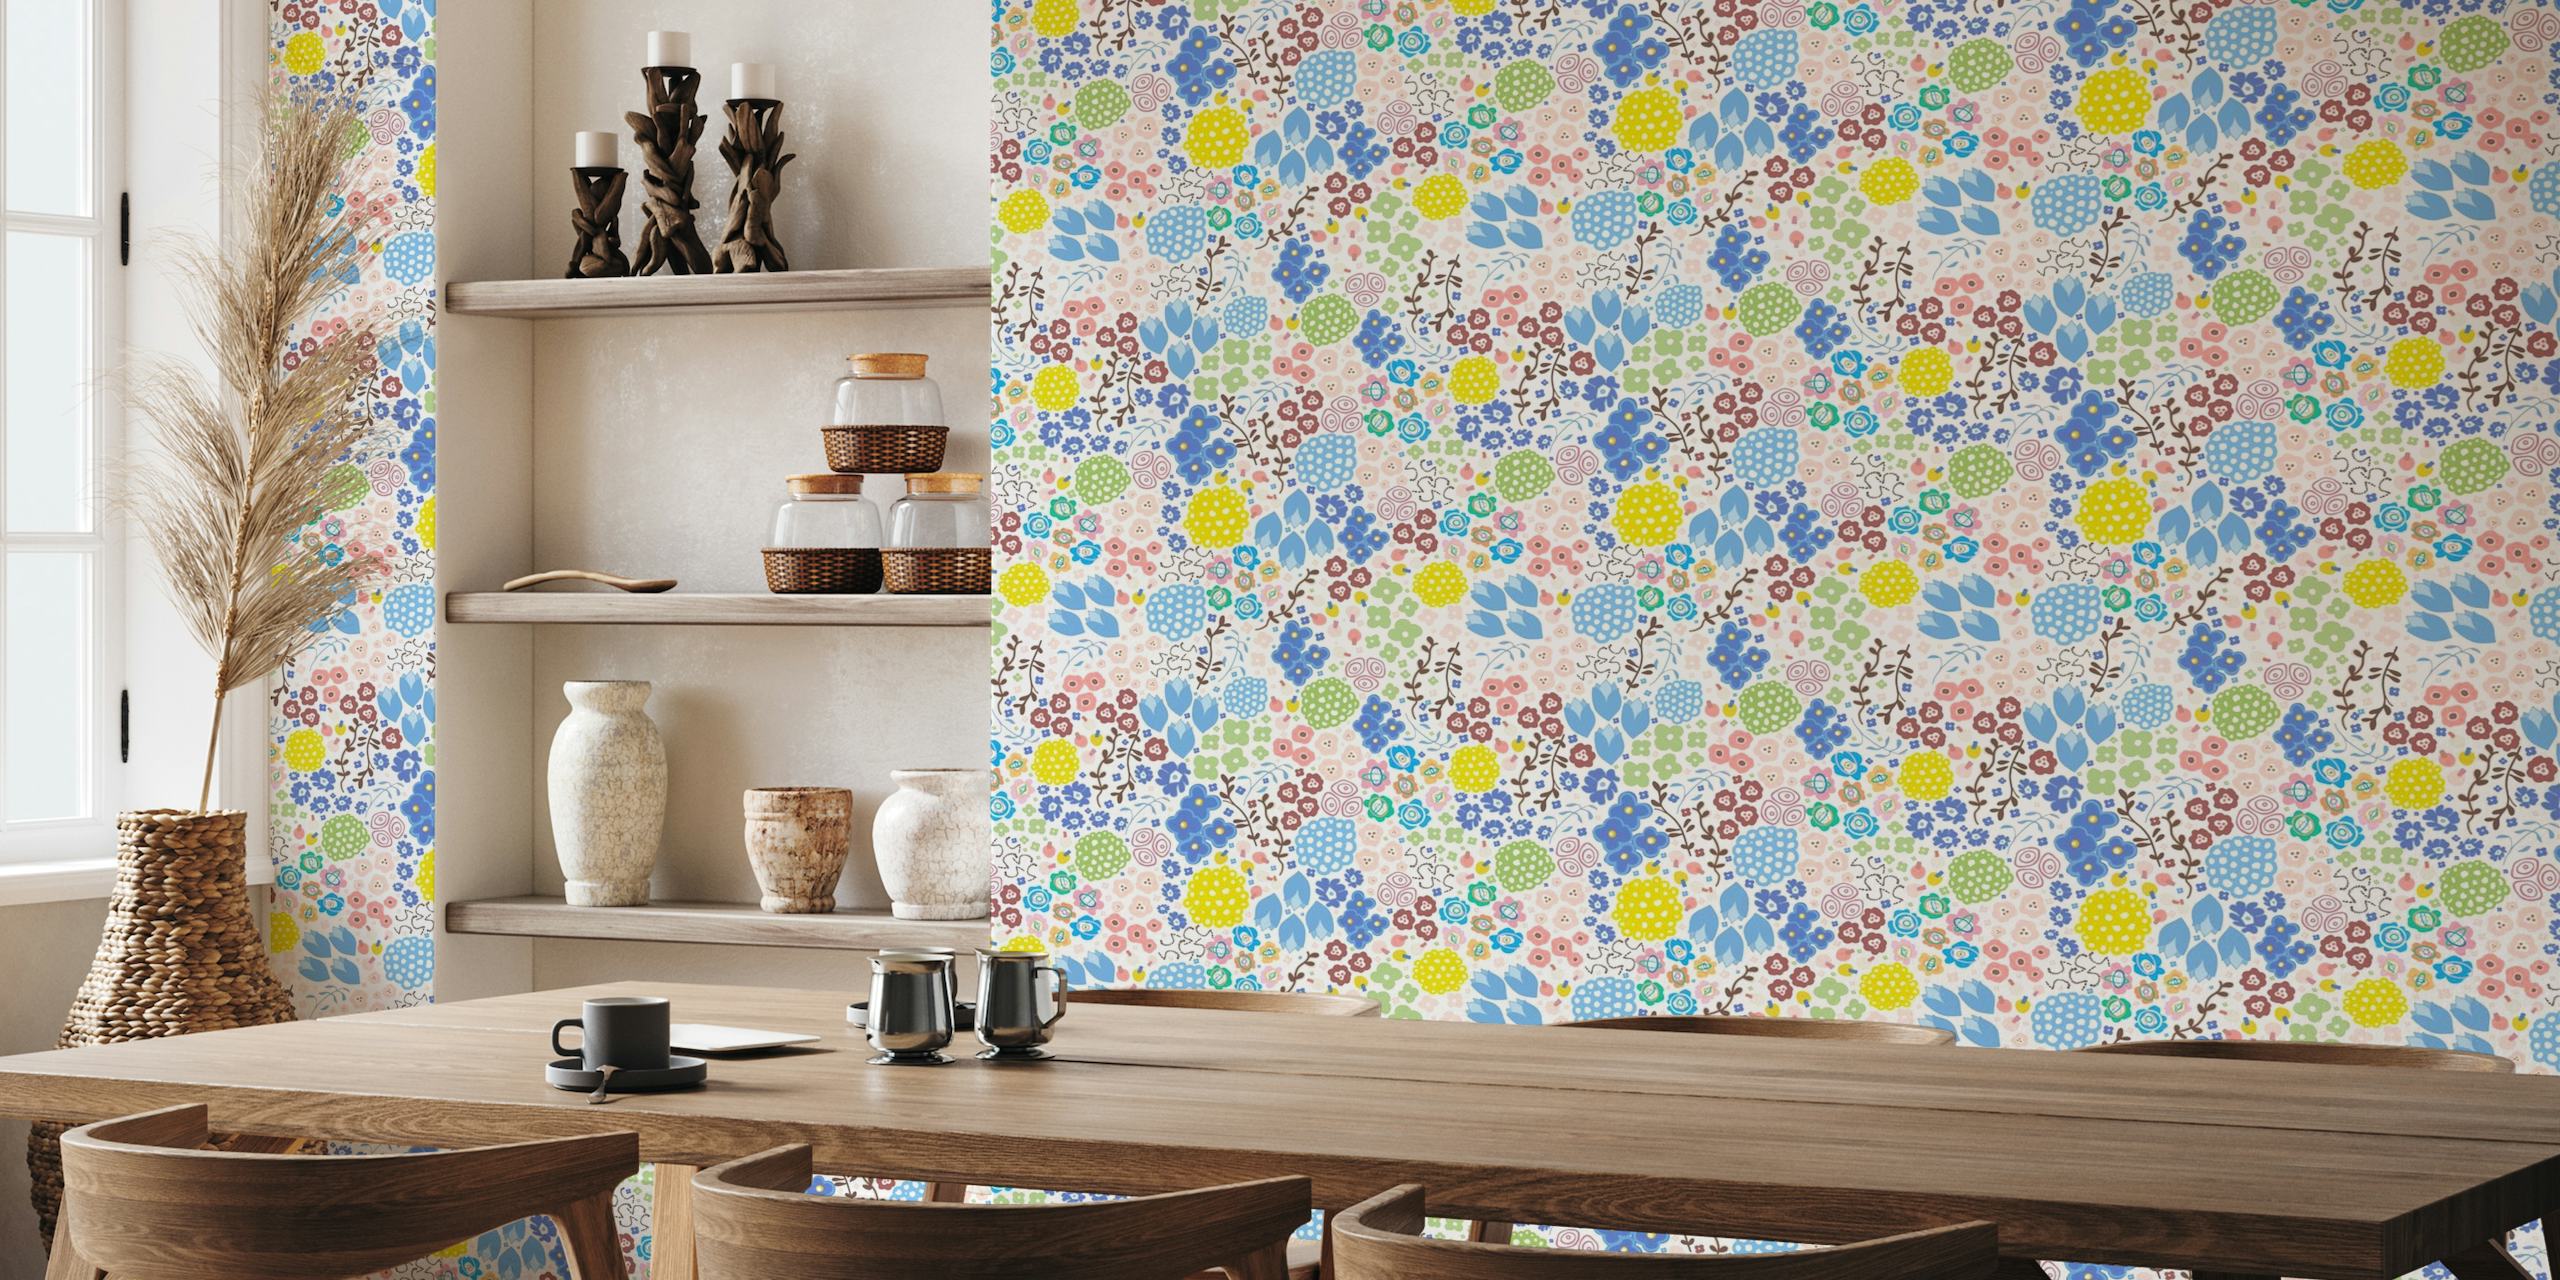 Colorful abstract modern floral ditsy pattern wall mural with mixed flowers and leaves